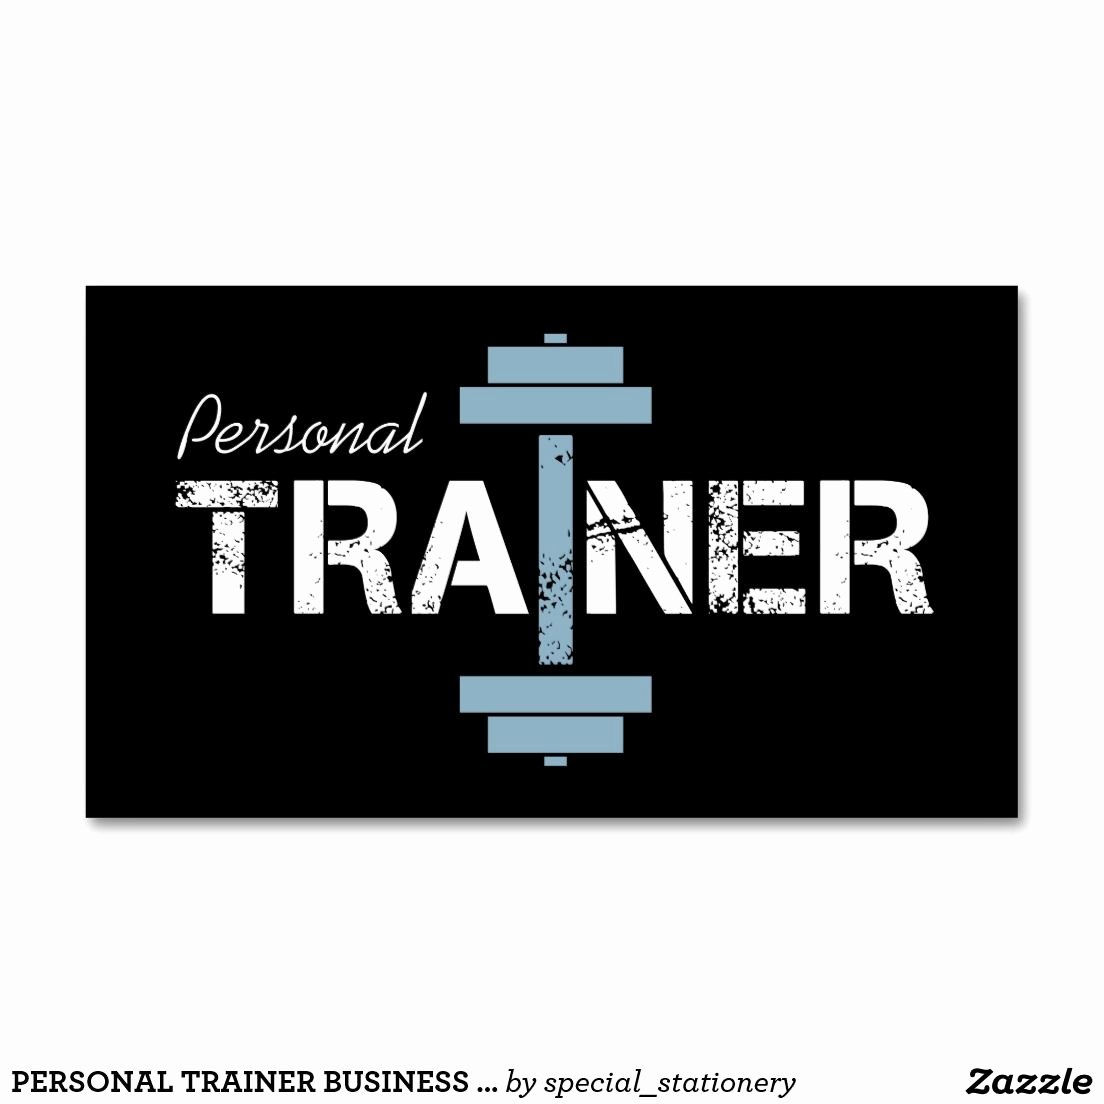 Personal Trainer Business Card Ideas Best Of Personal Trainer Business Cards Rustic Military